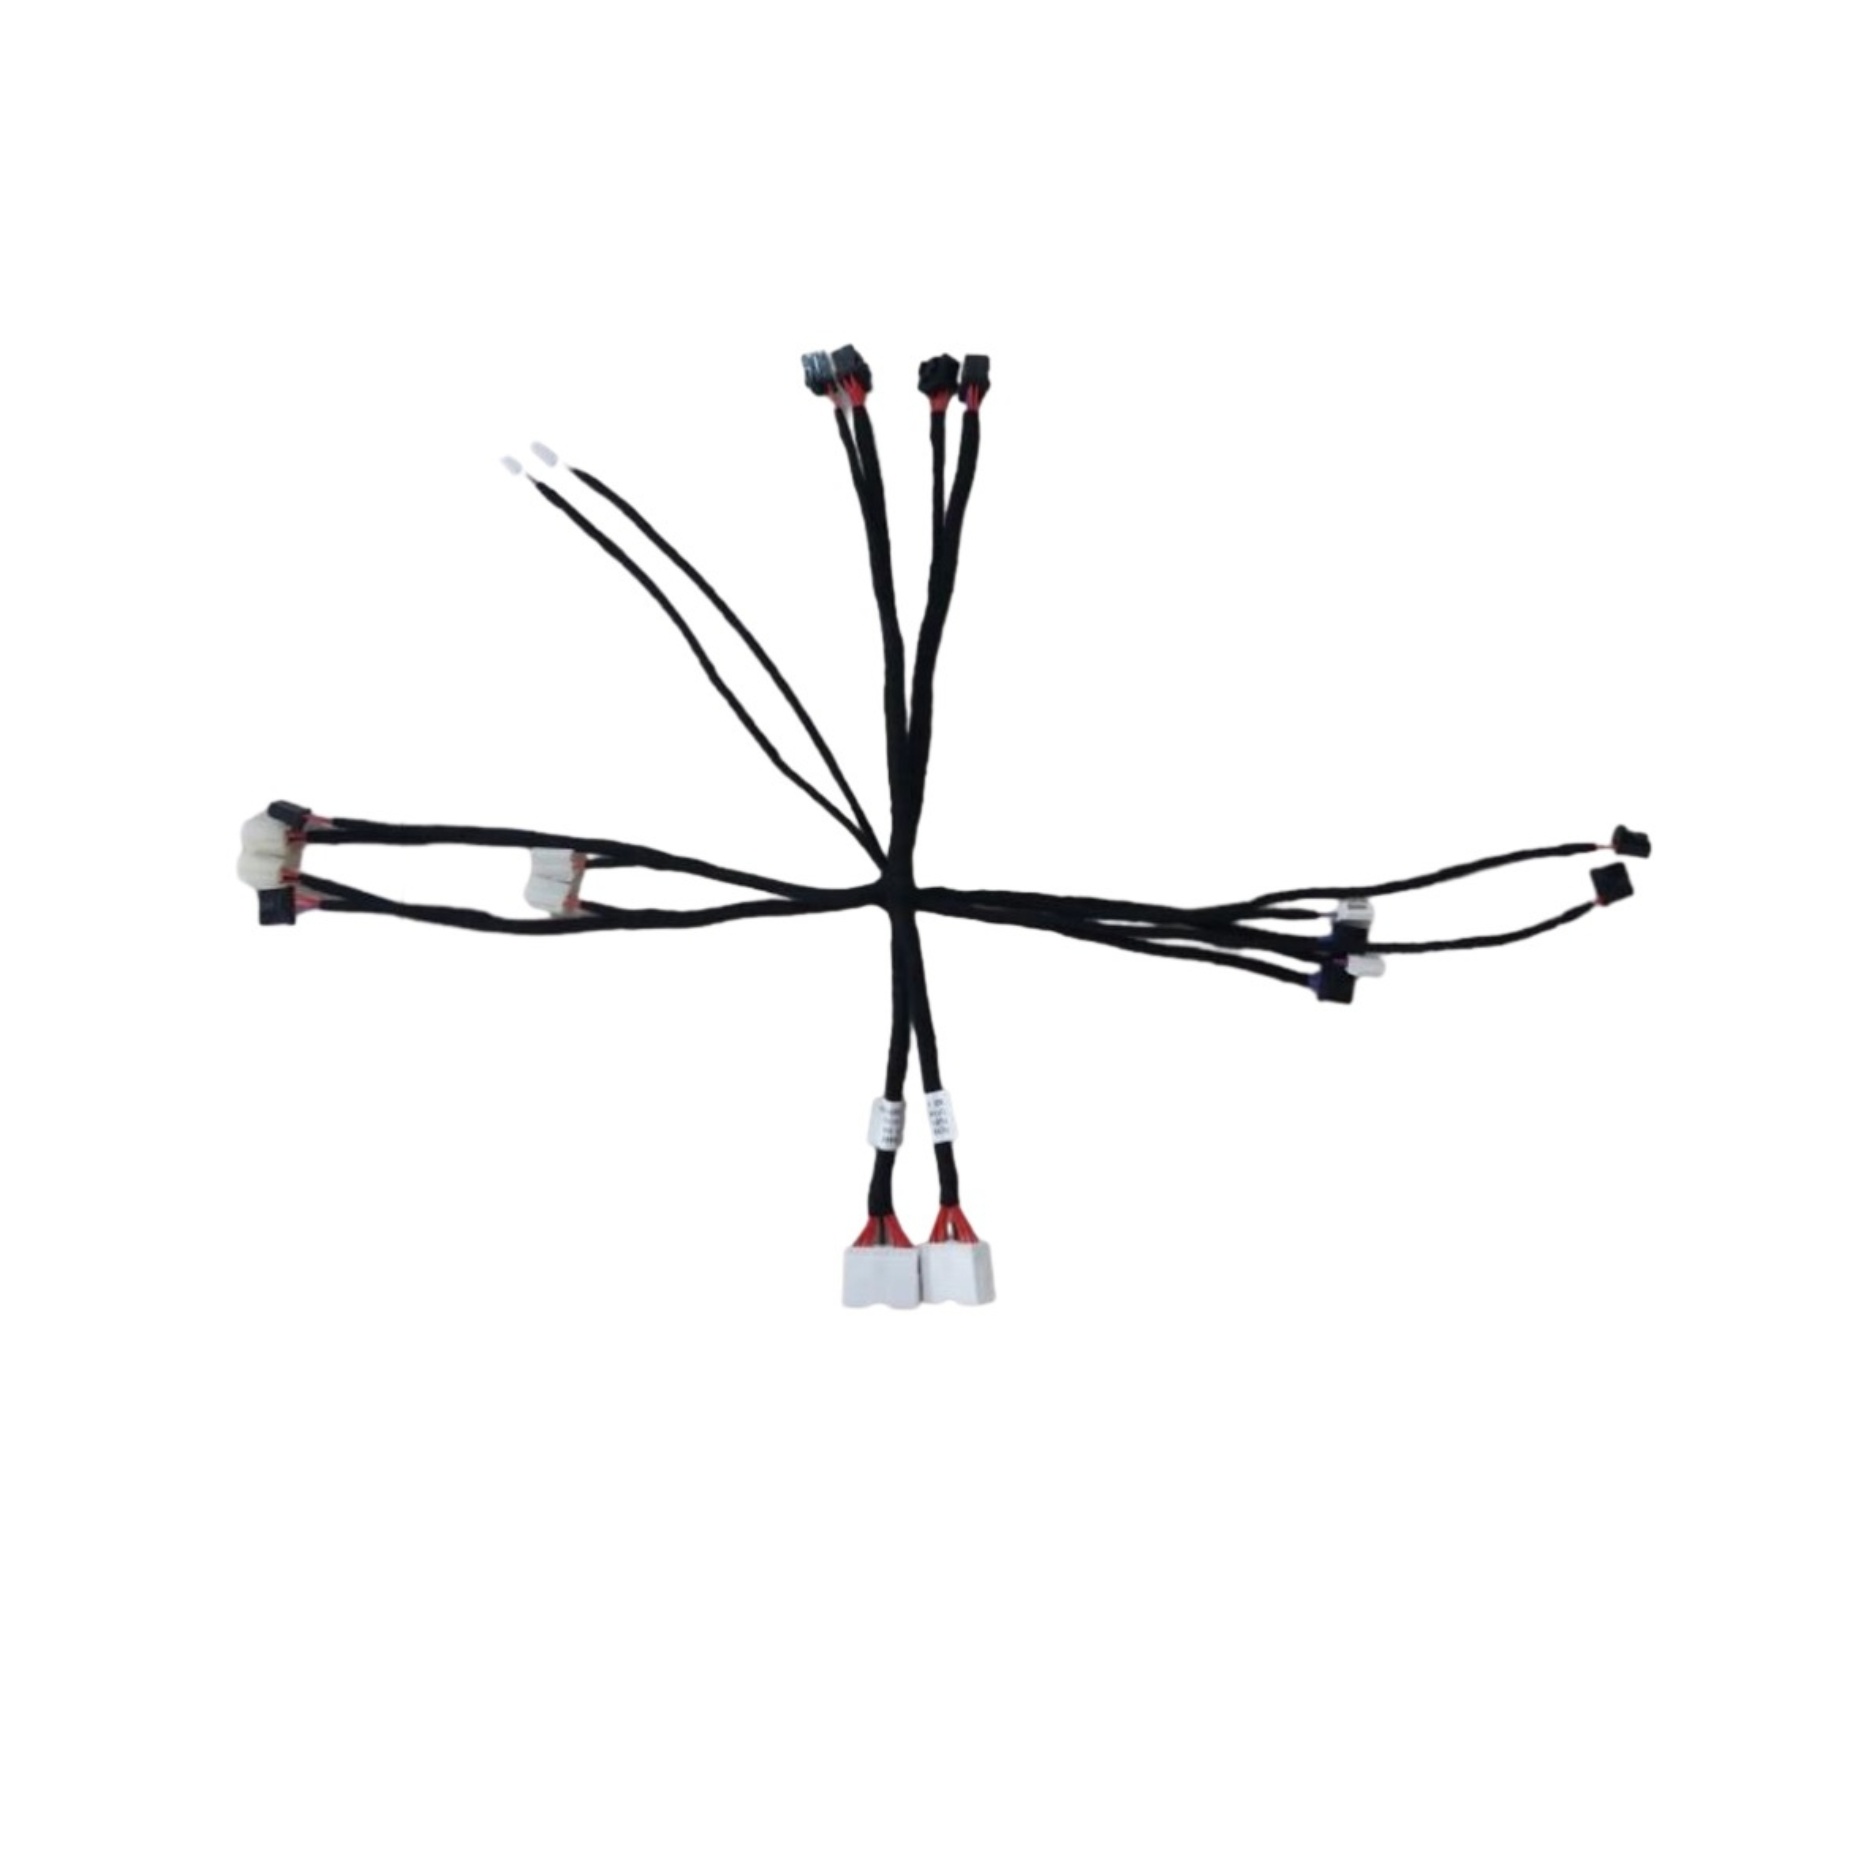 Automotive Heater System Wiring Harness